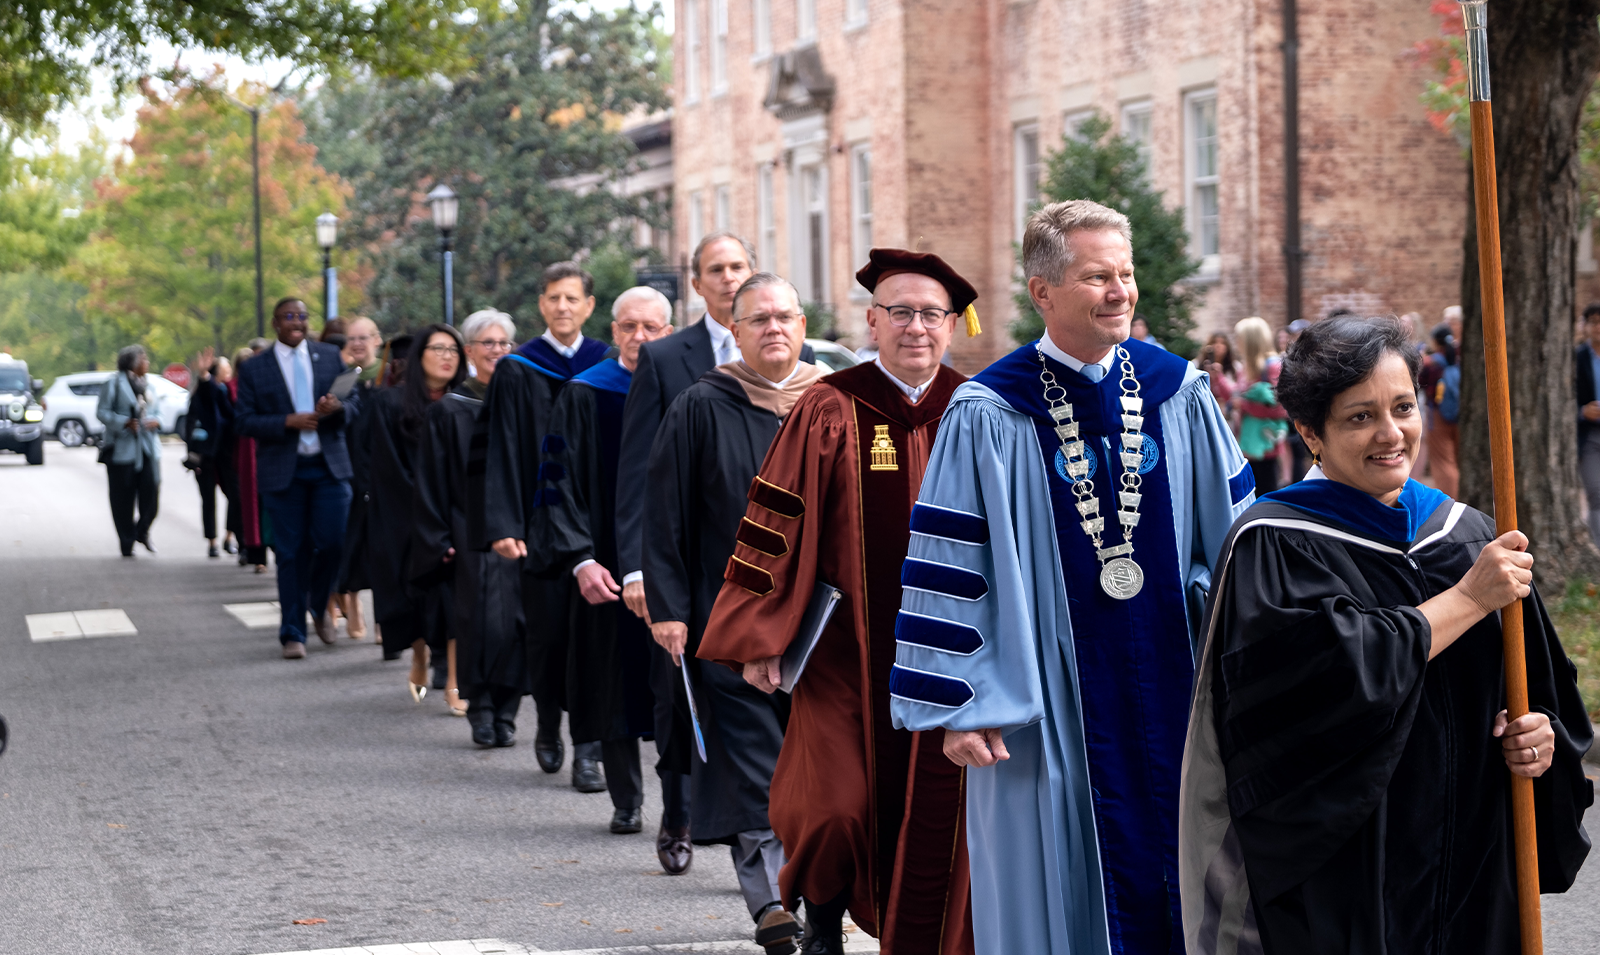 A parade of University leaders in regalia walking down a street, Cameron Avenue, during a University Day event.